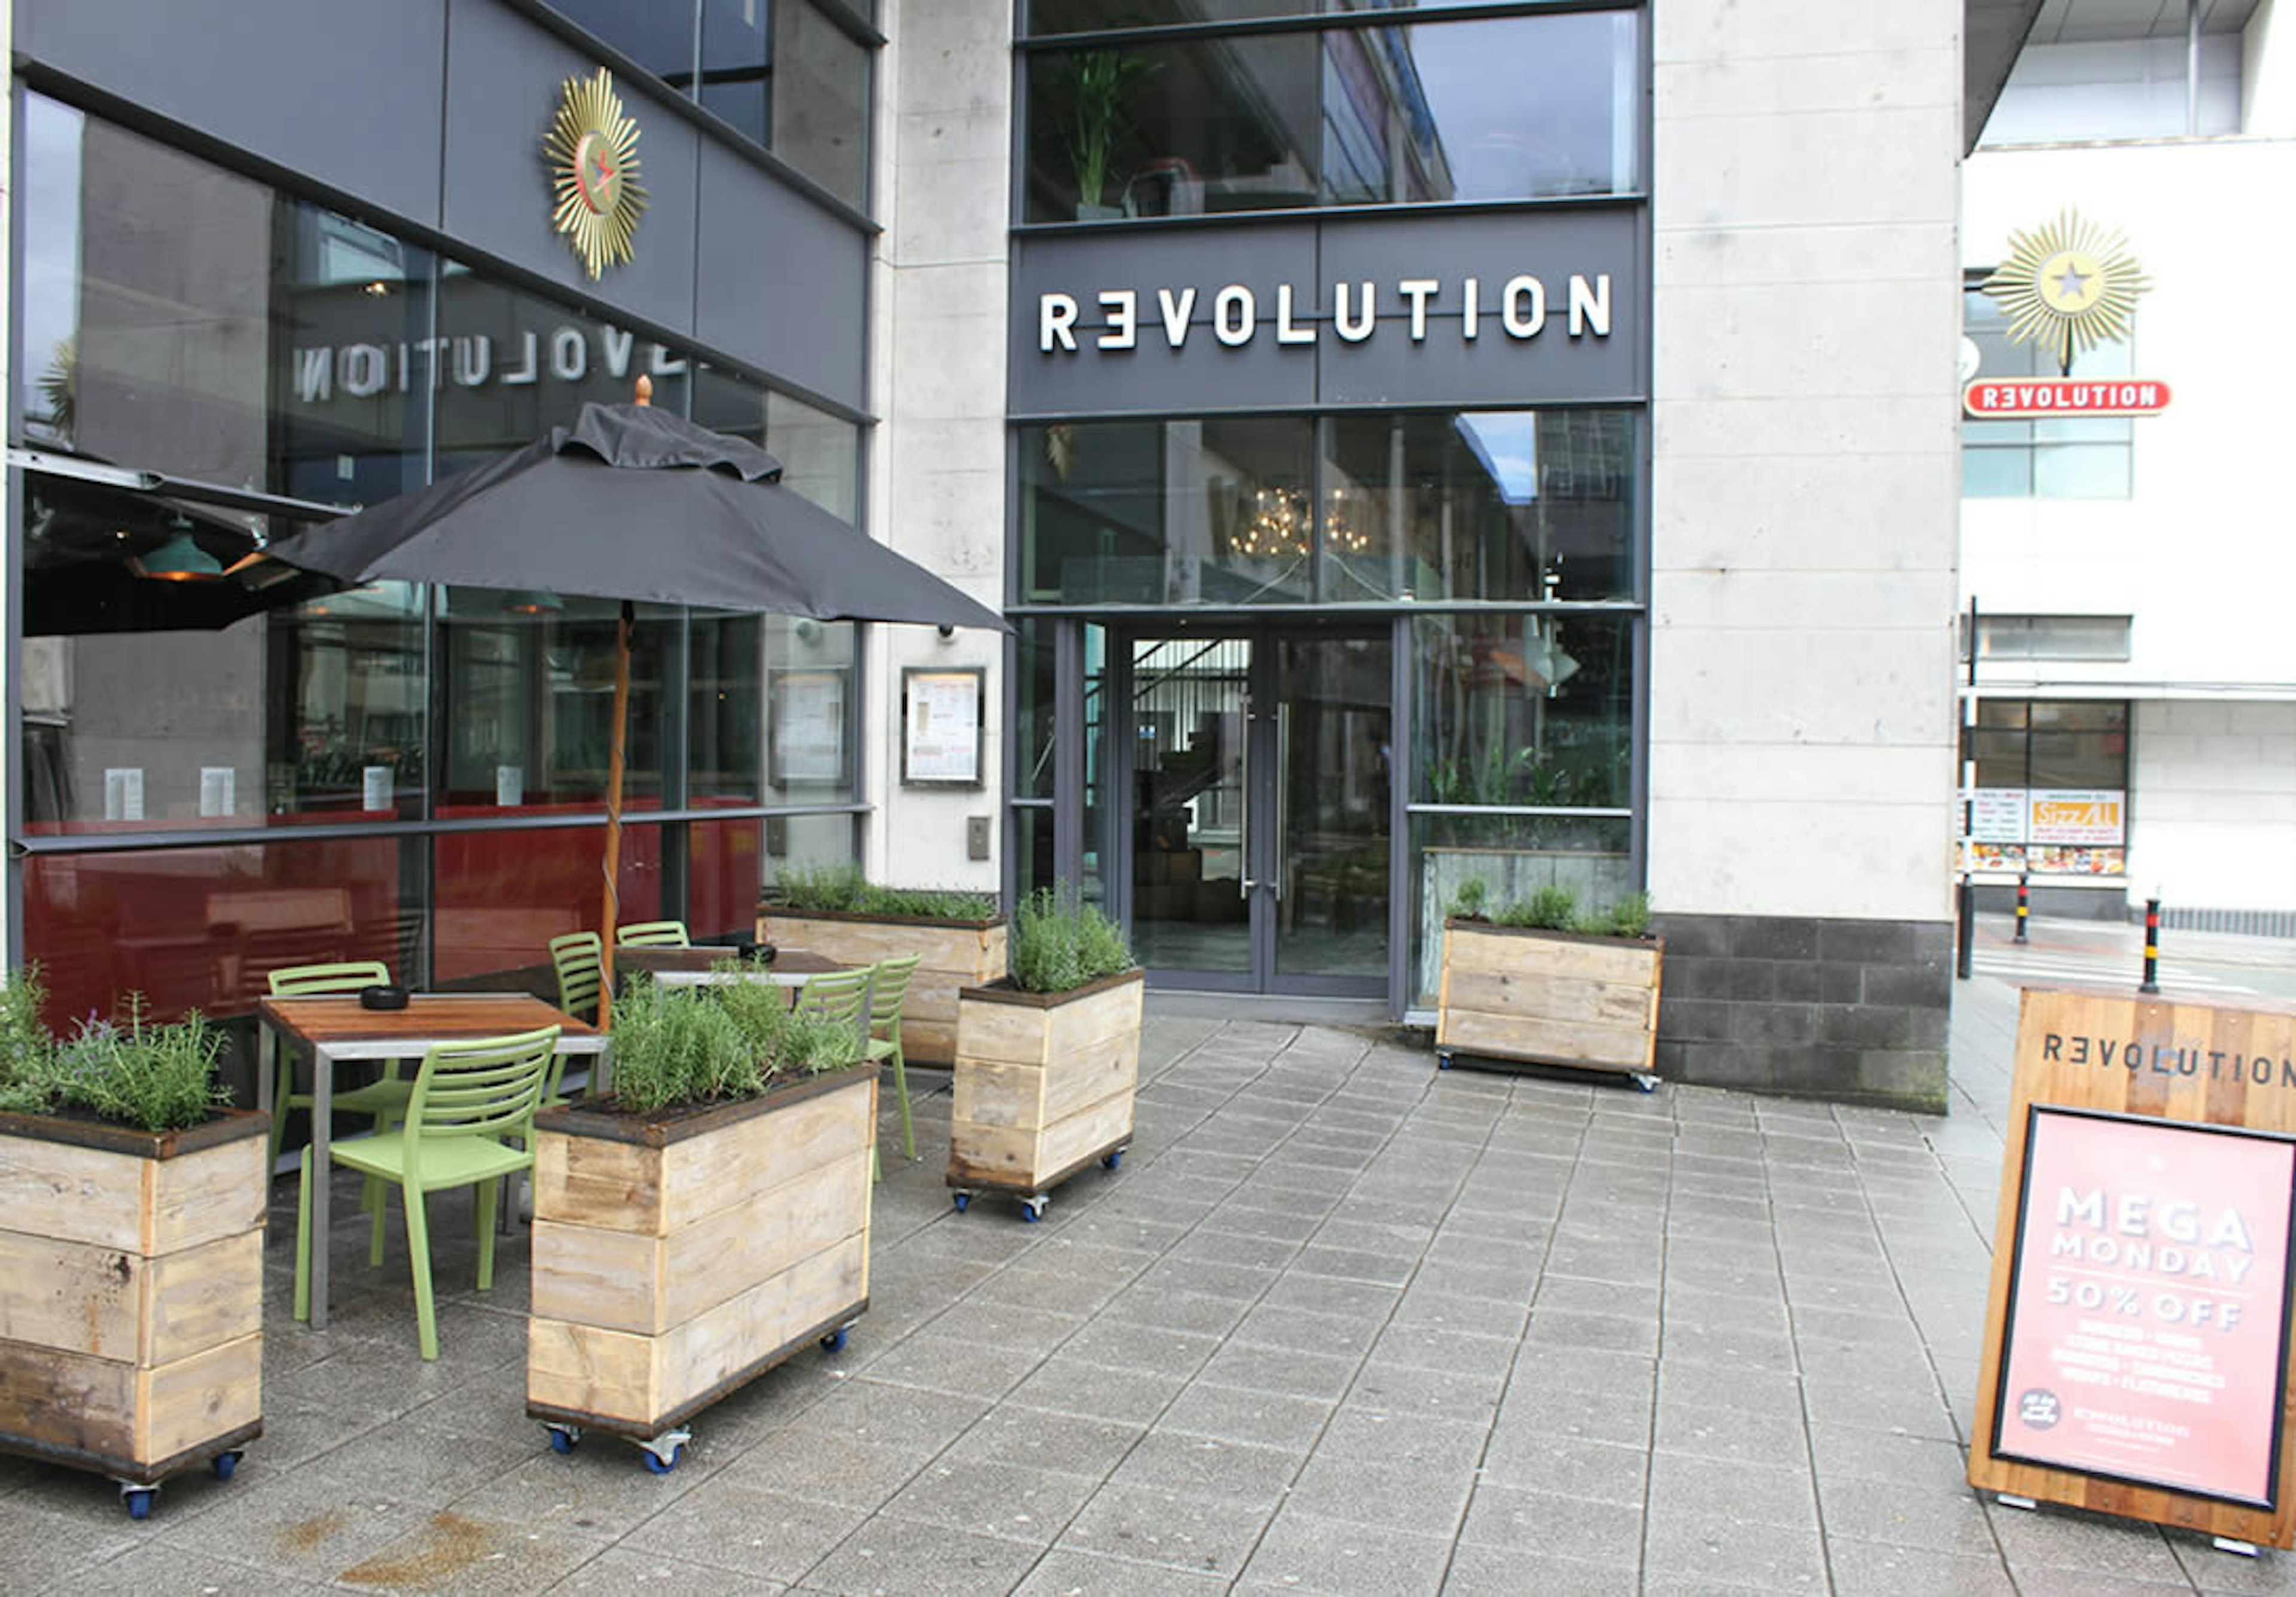 Business - Revolution Plymouth